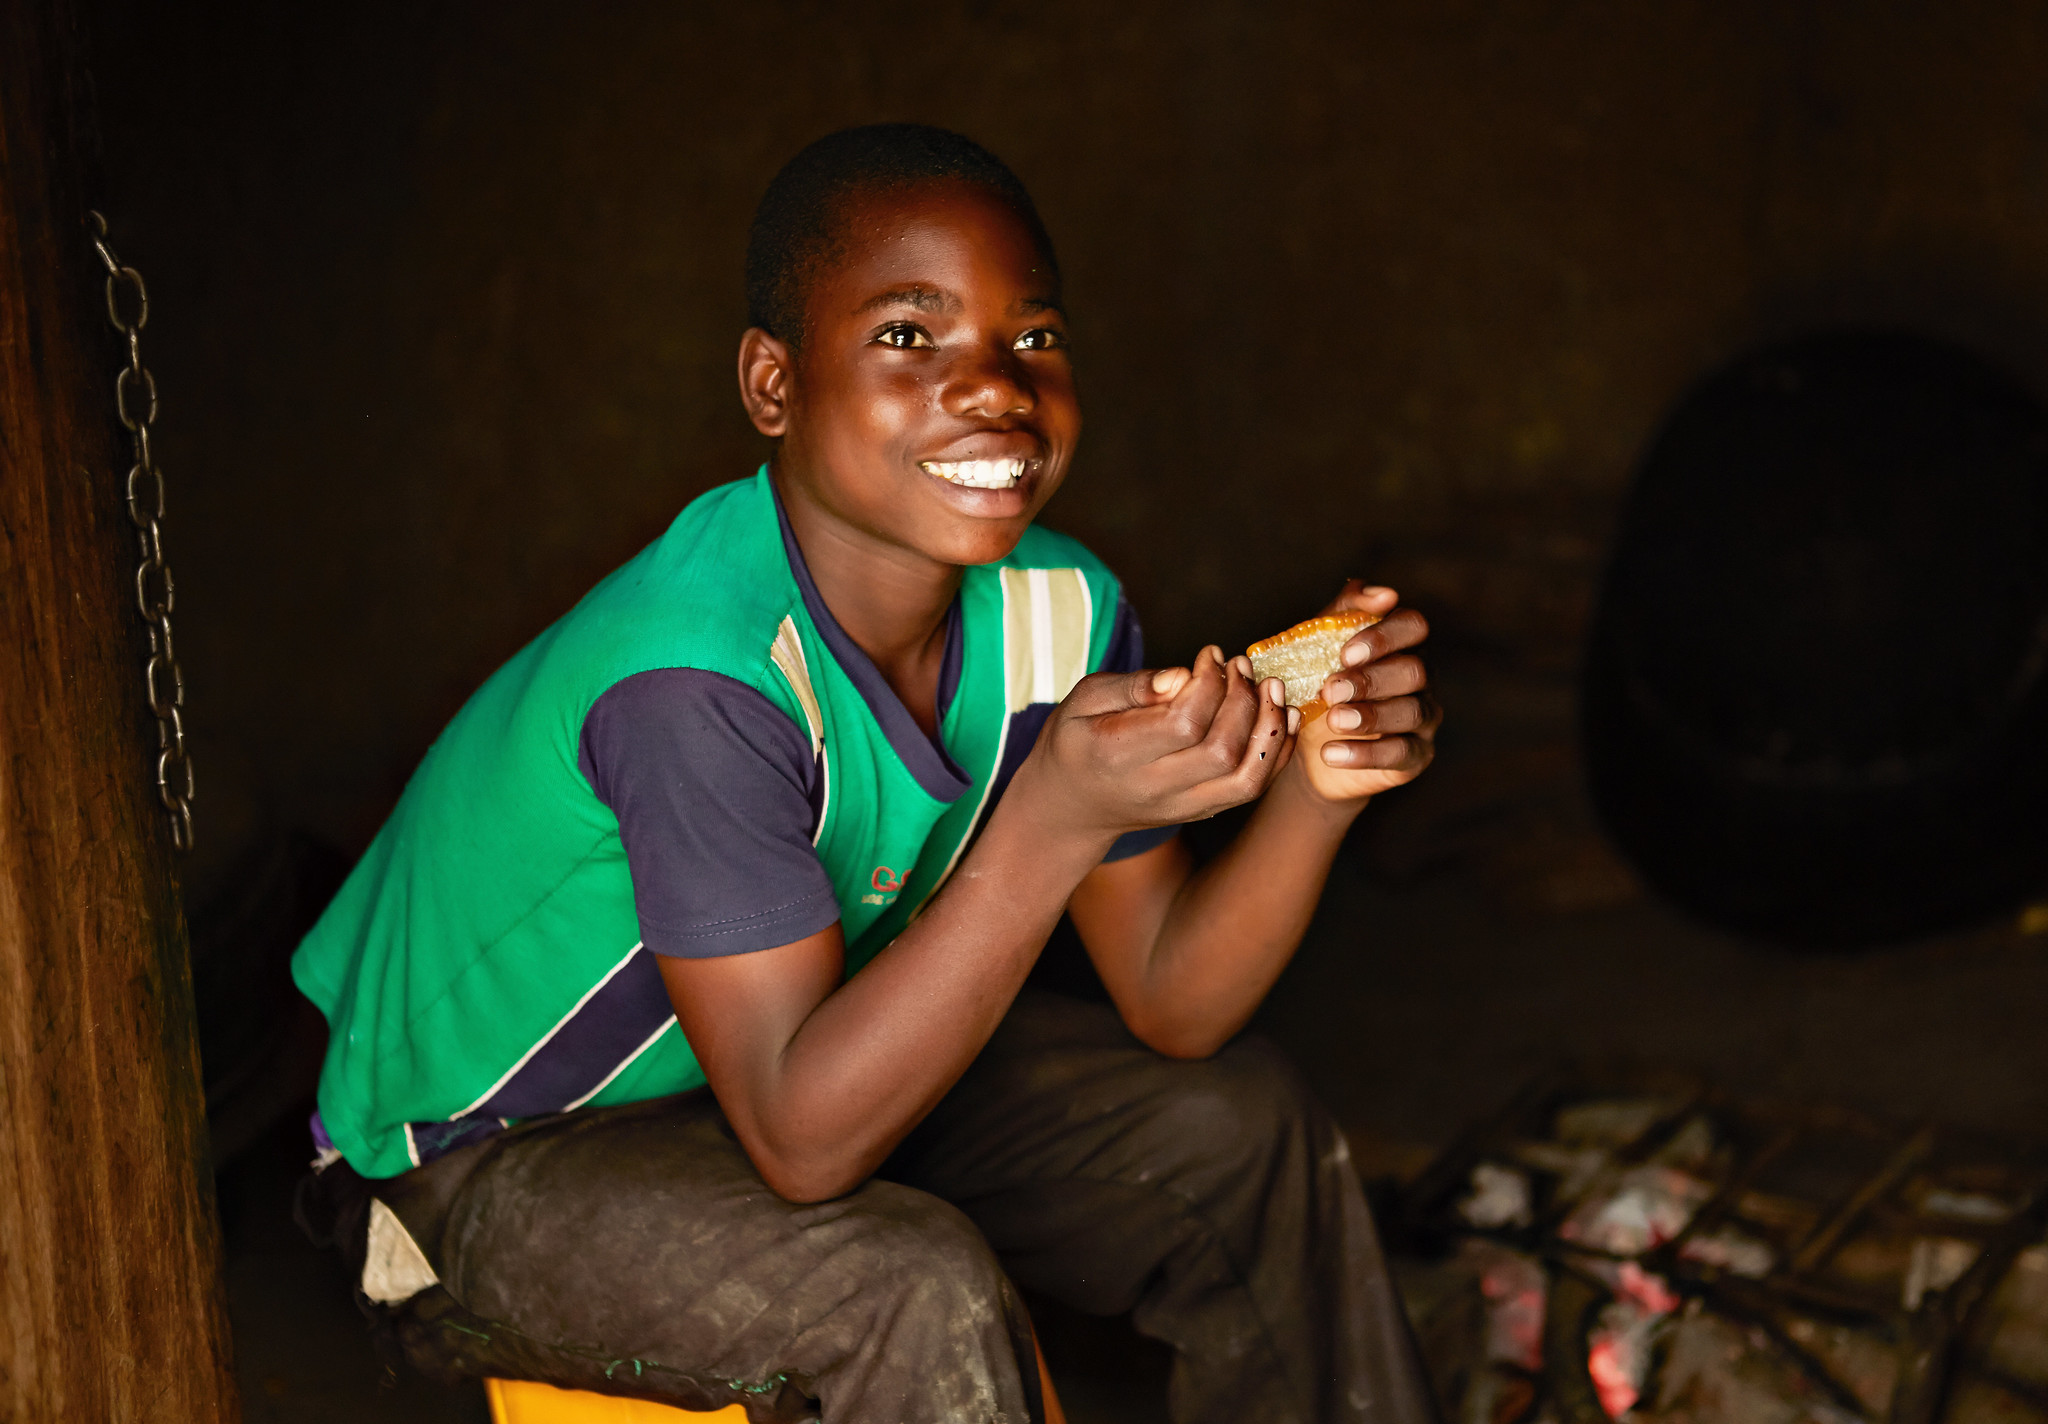 A 2015 study published in The Journal of Nutrition found that vitamin A-biofortified orange maize significantly improves visual functions in children, like night vision. (Photo: Libby Edwards/HarvestPlus)